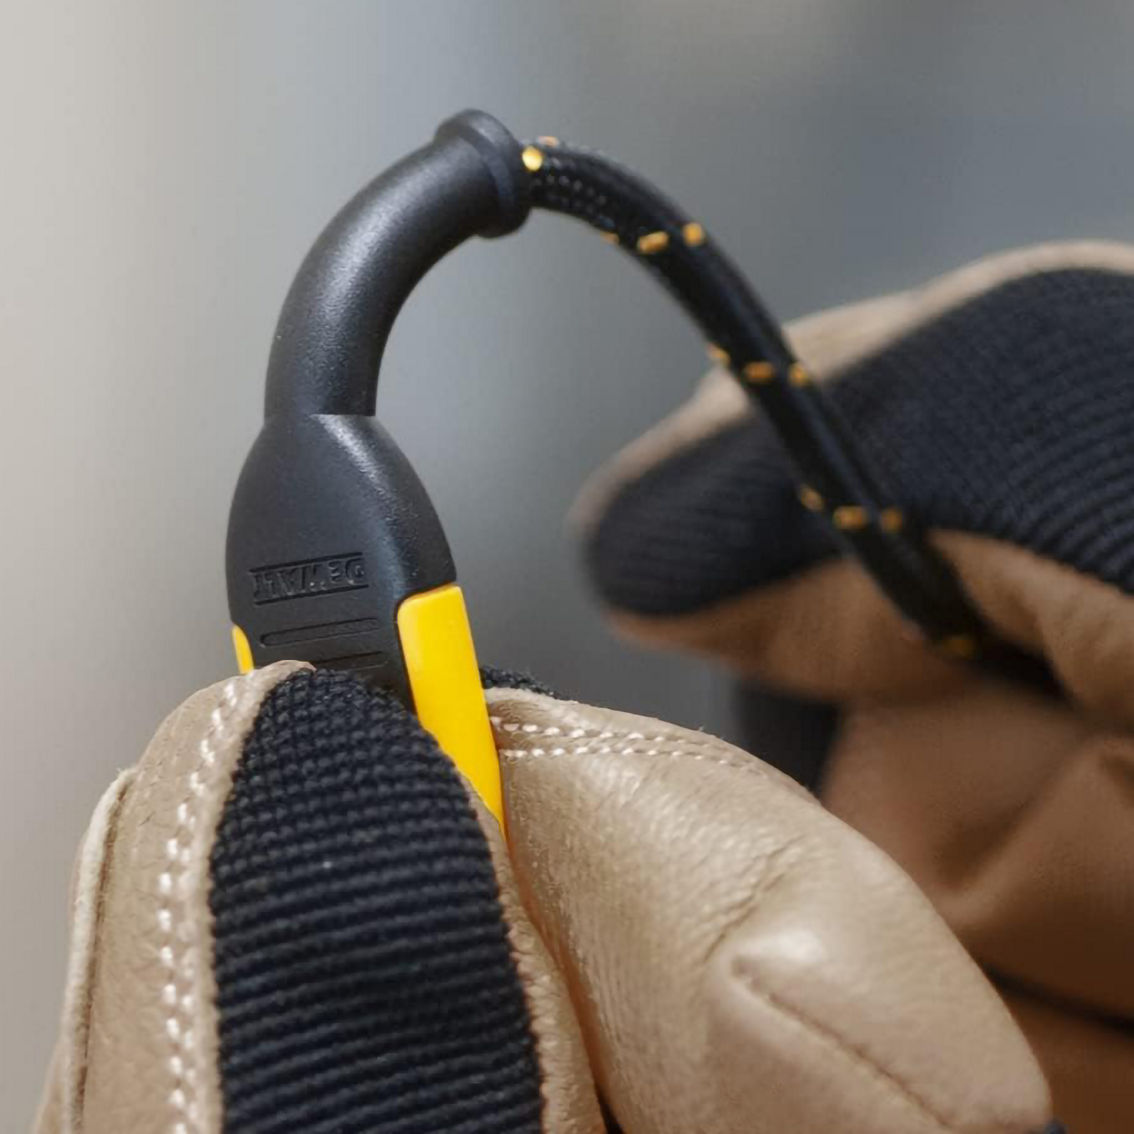 DeWalt Reinforced 3-in-1 Charging Cable for Lightning, Type C, and Micro-USB - Image 7 of 8